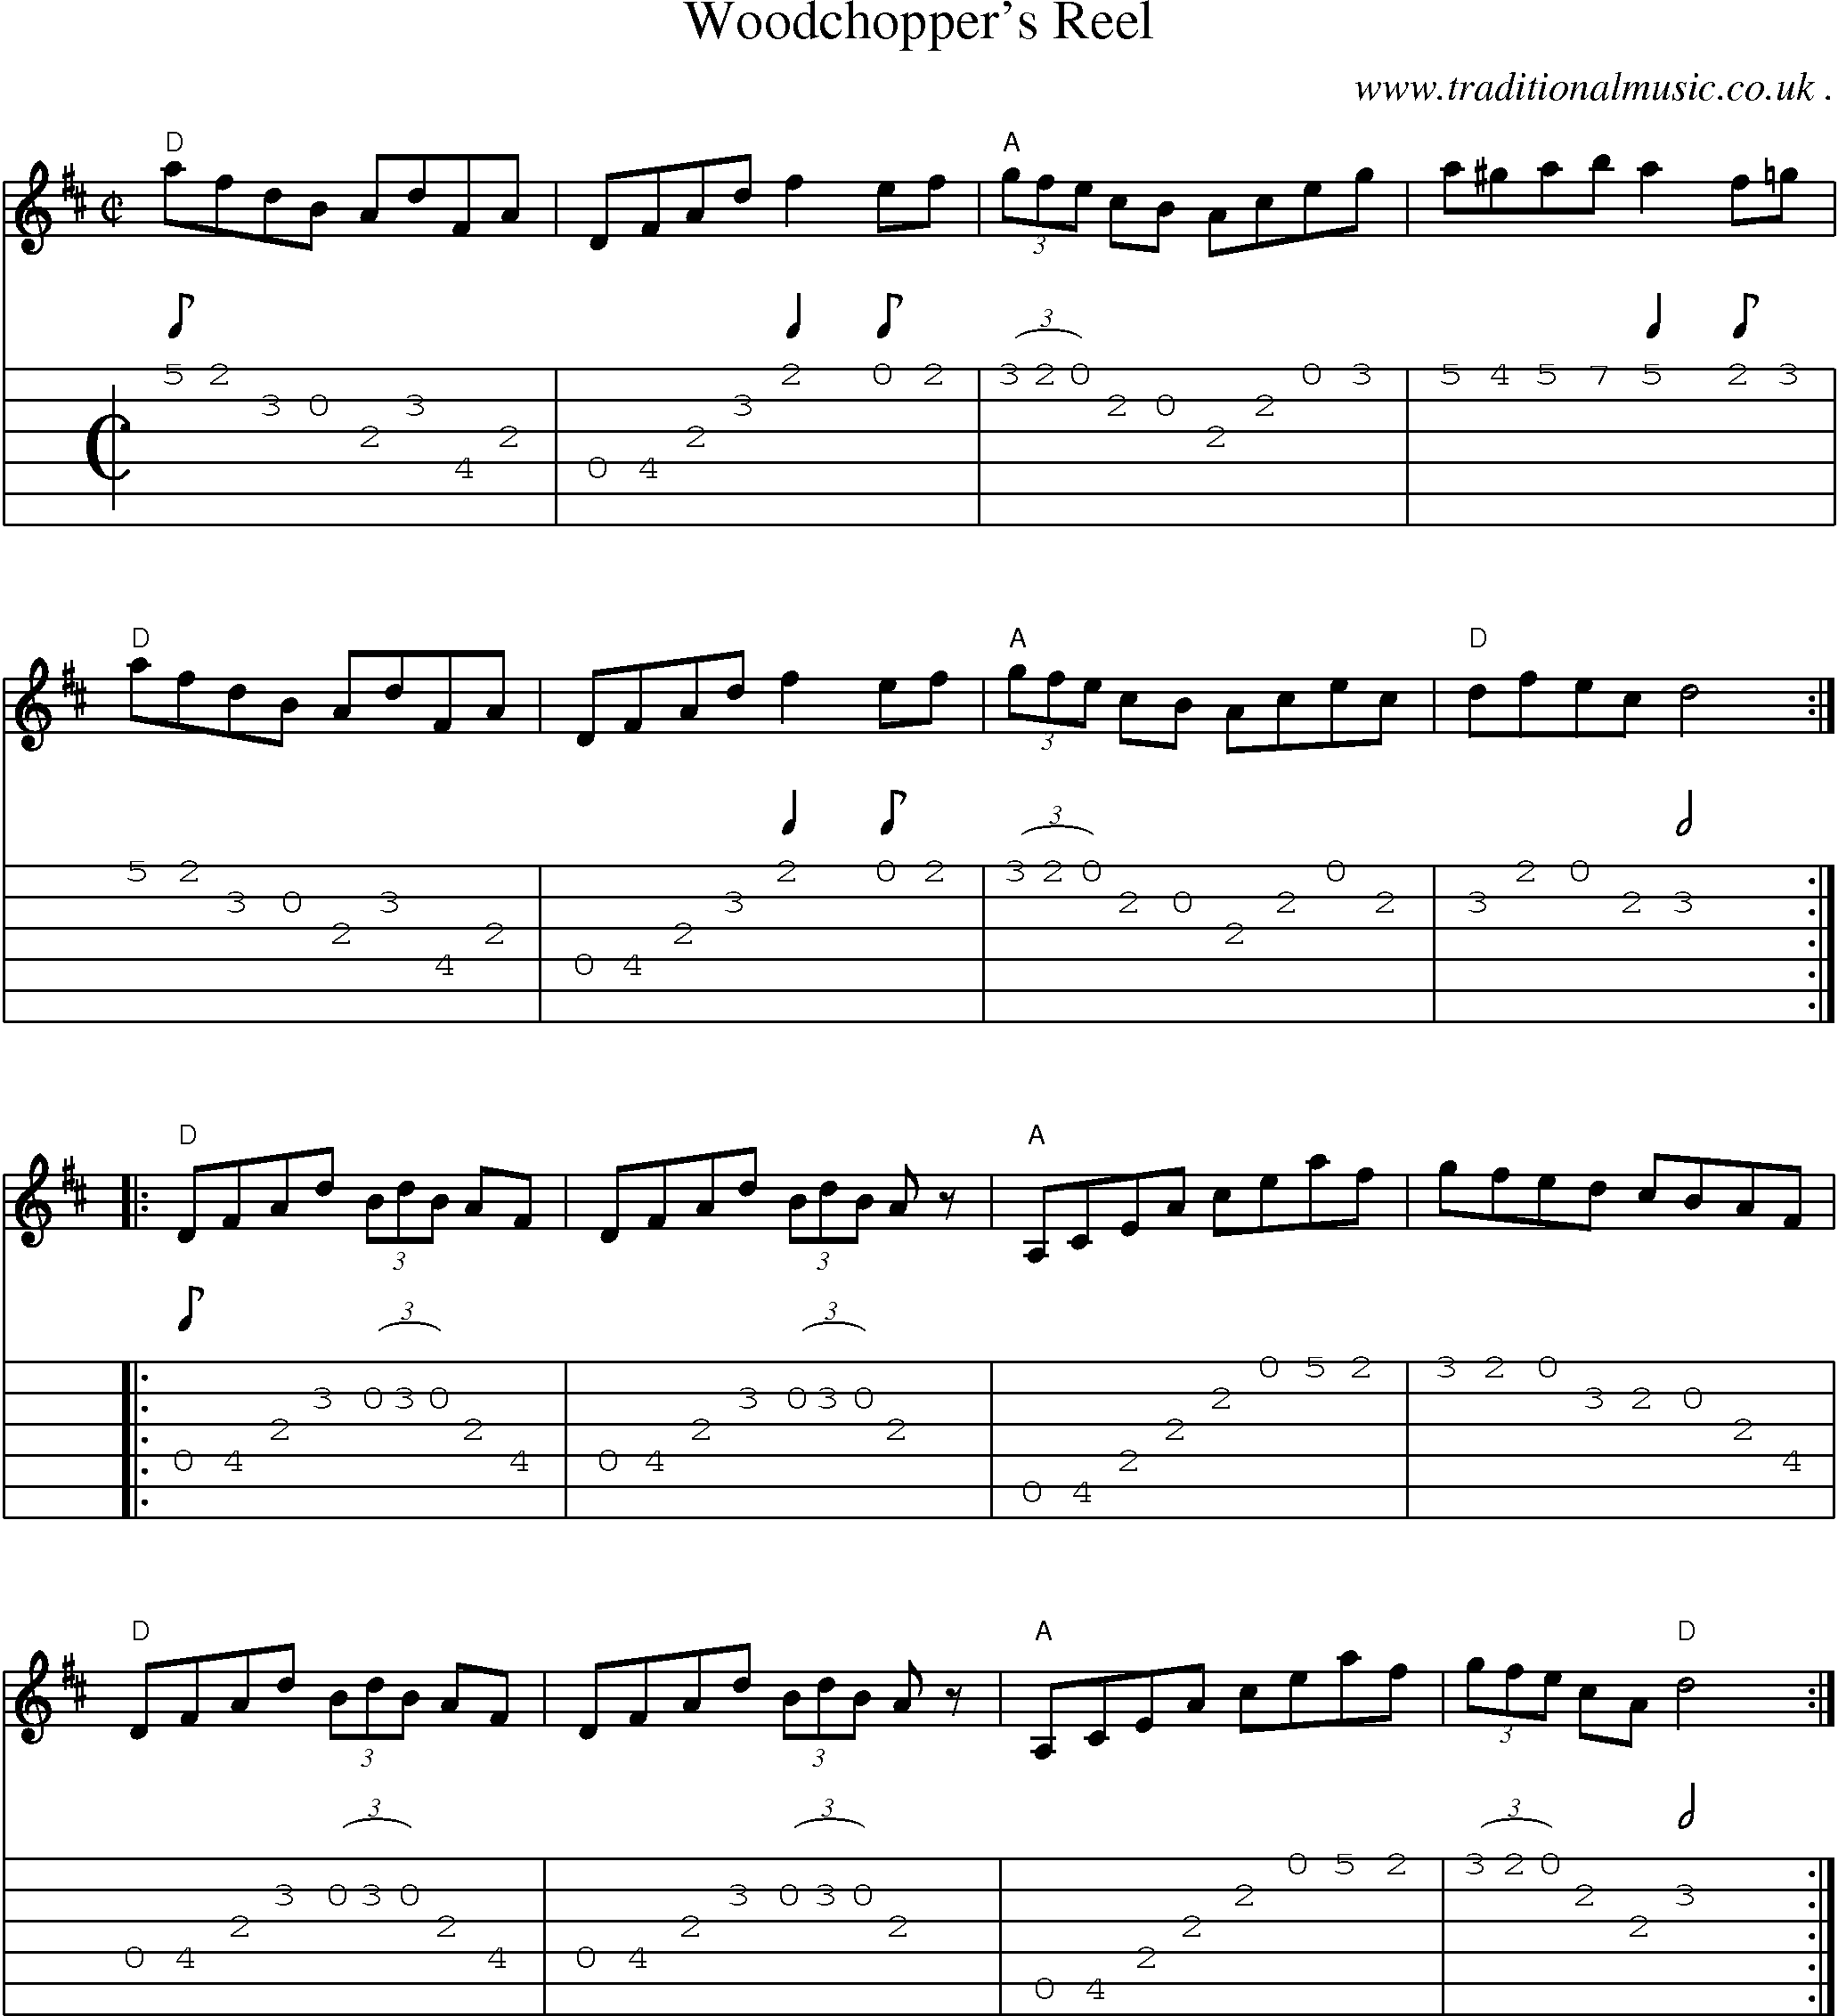 Sheet-music  score, Chords and Guitar Tabs for Woodchoppers Reel